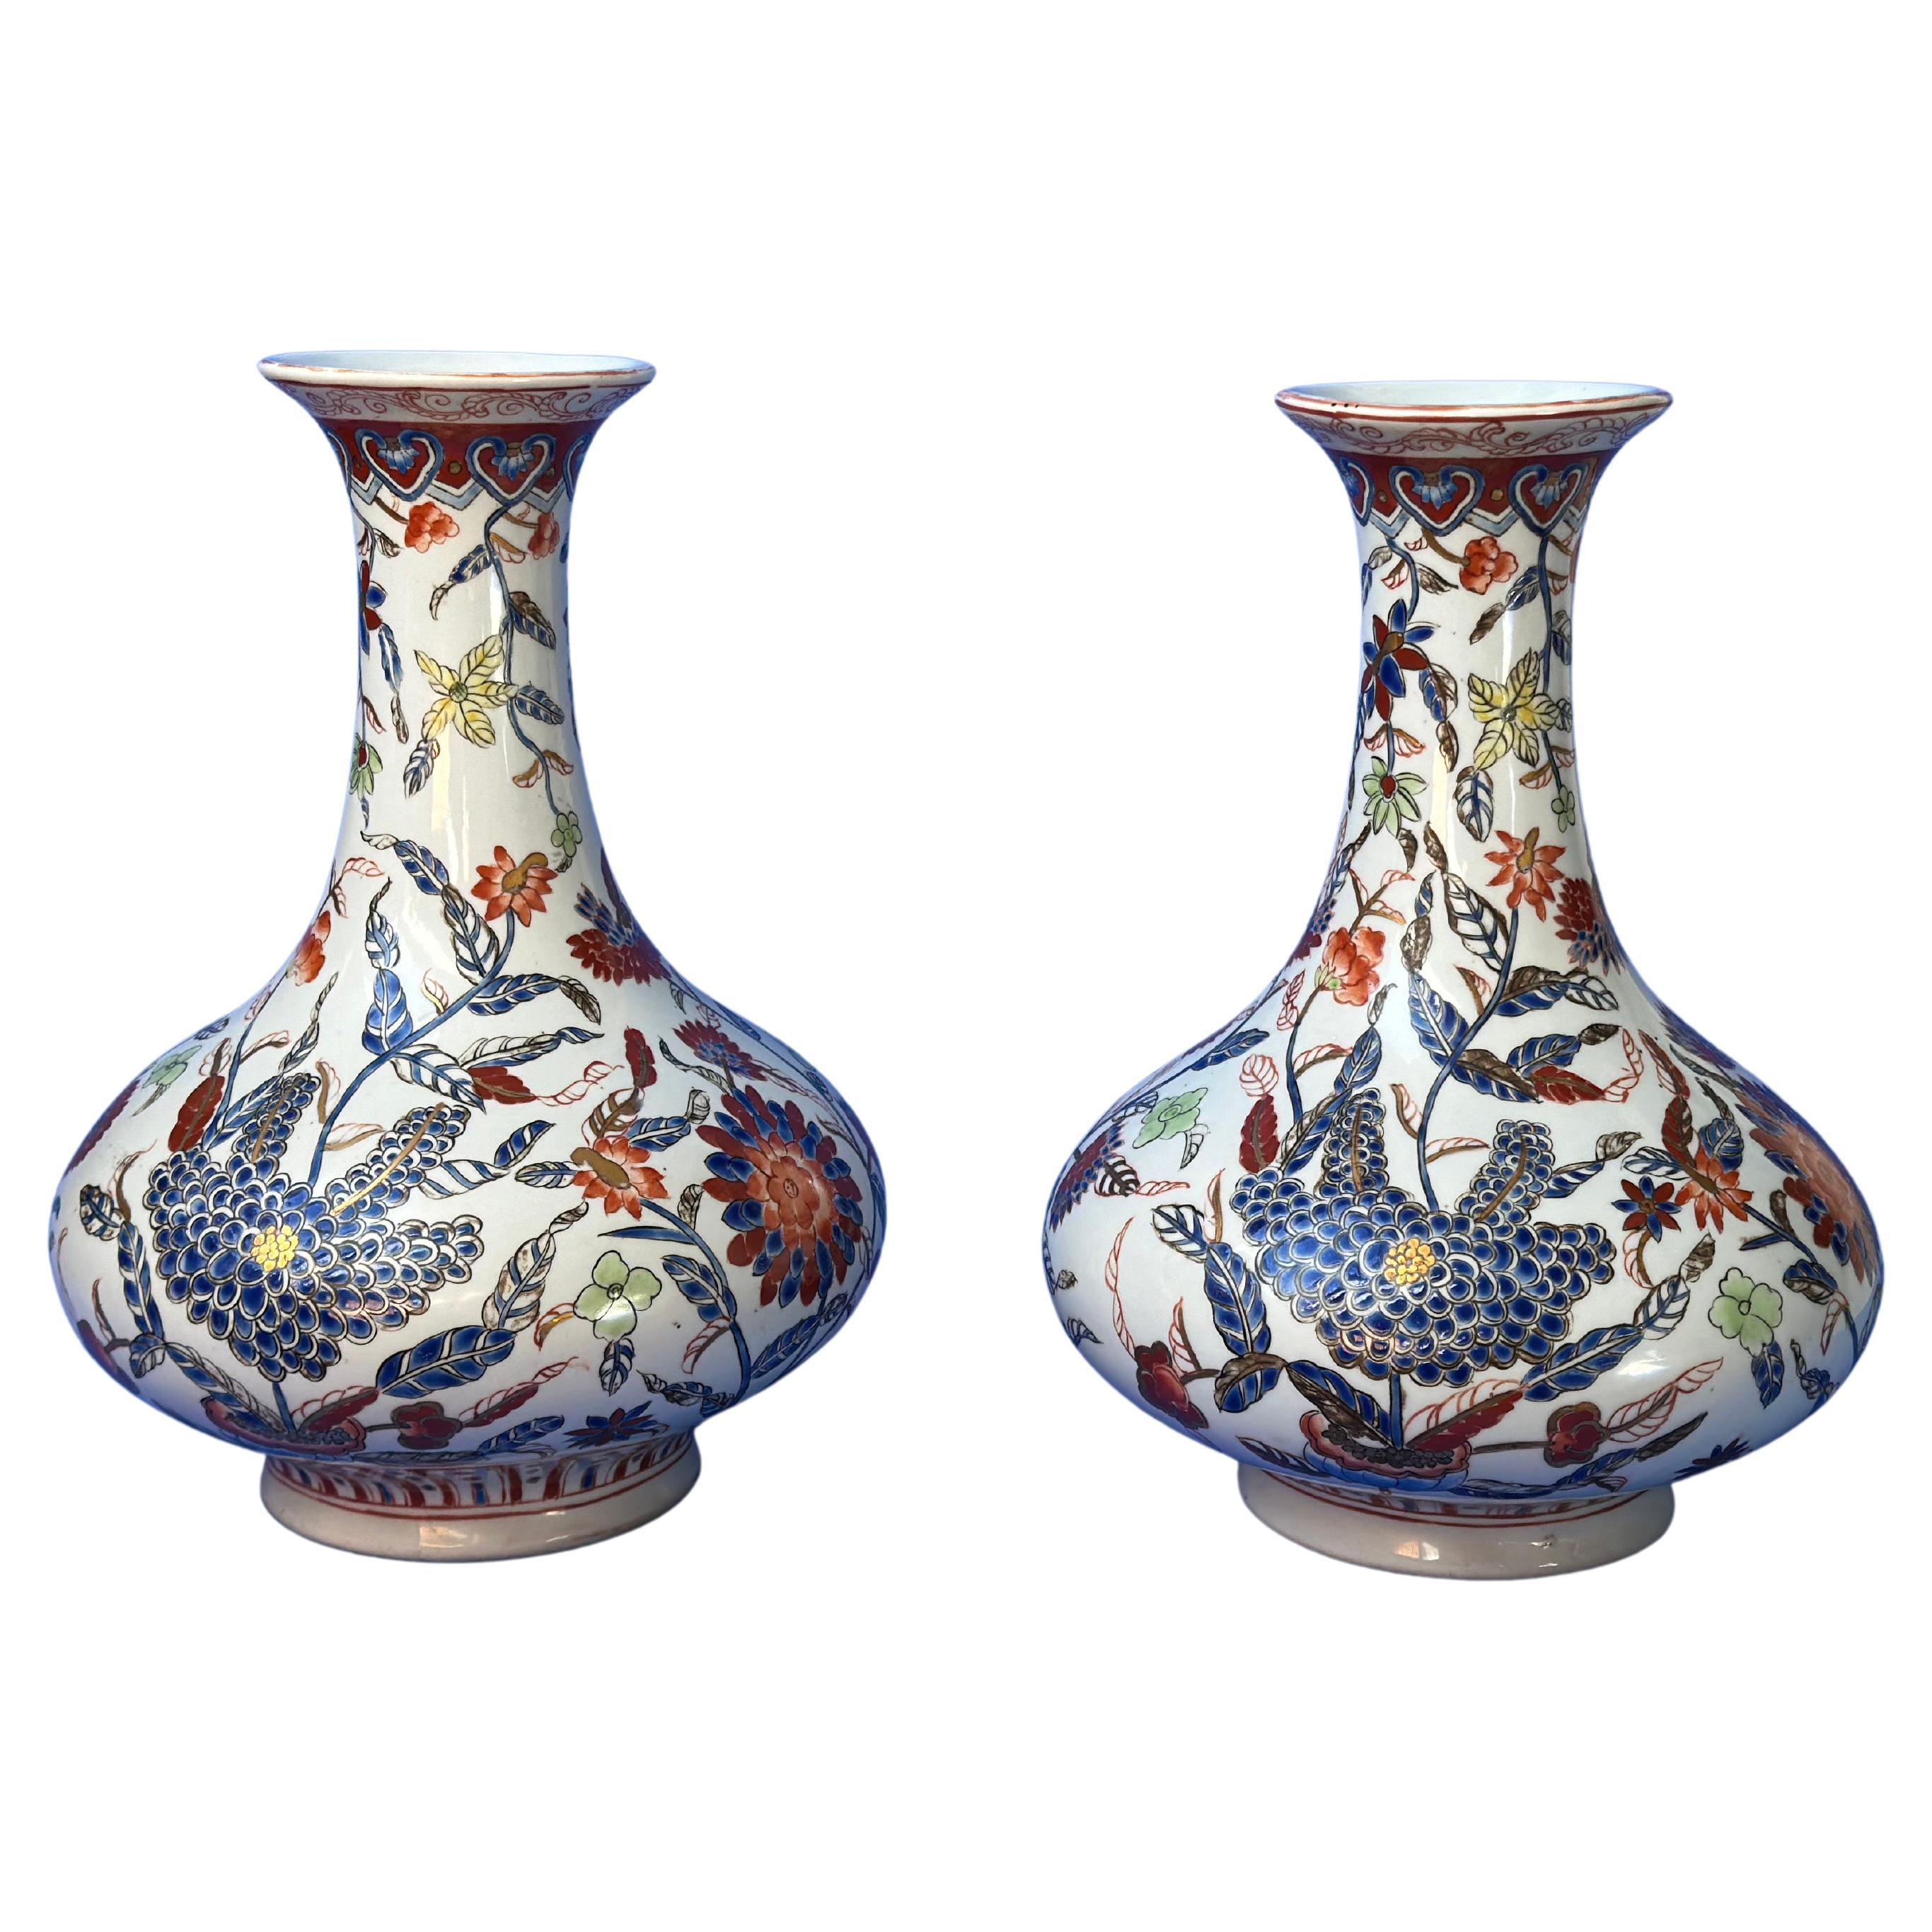 Chinese Vintage Pear Shaped Porcelain Vases - Red and Blue Tongzhi/Qing Style